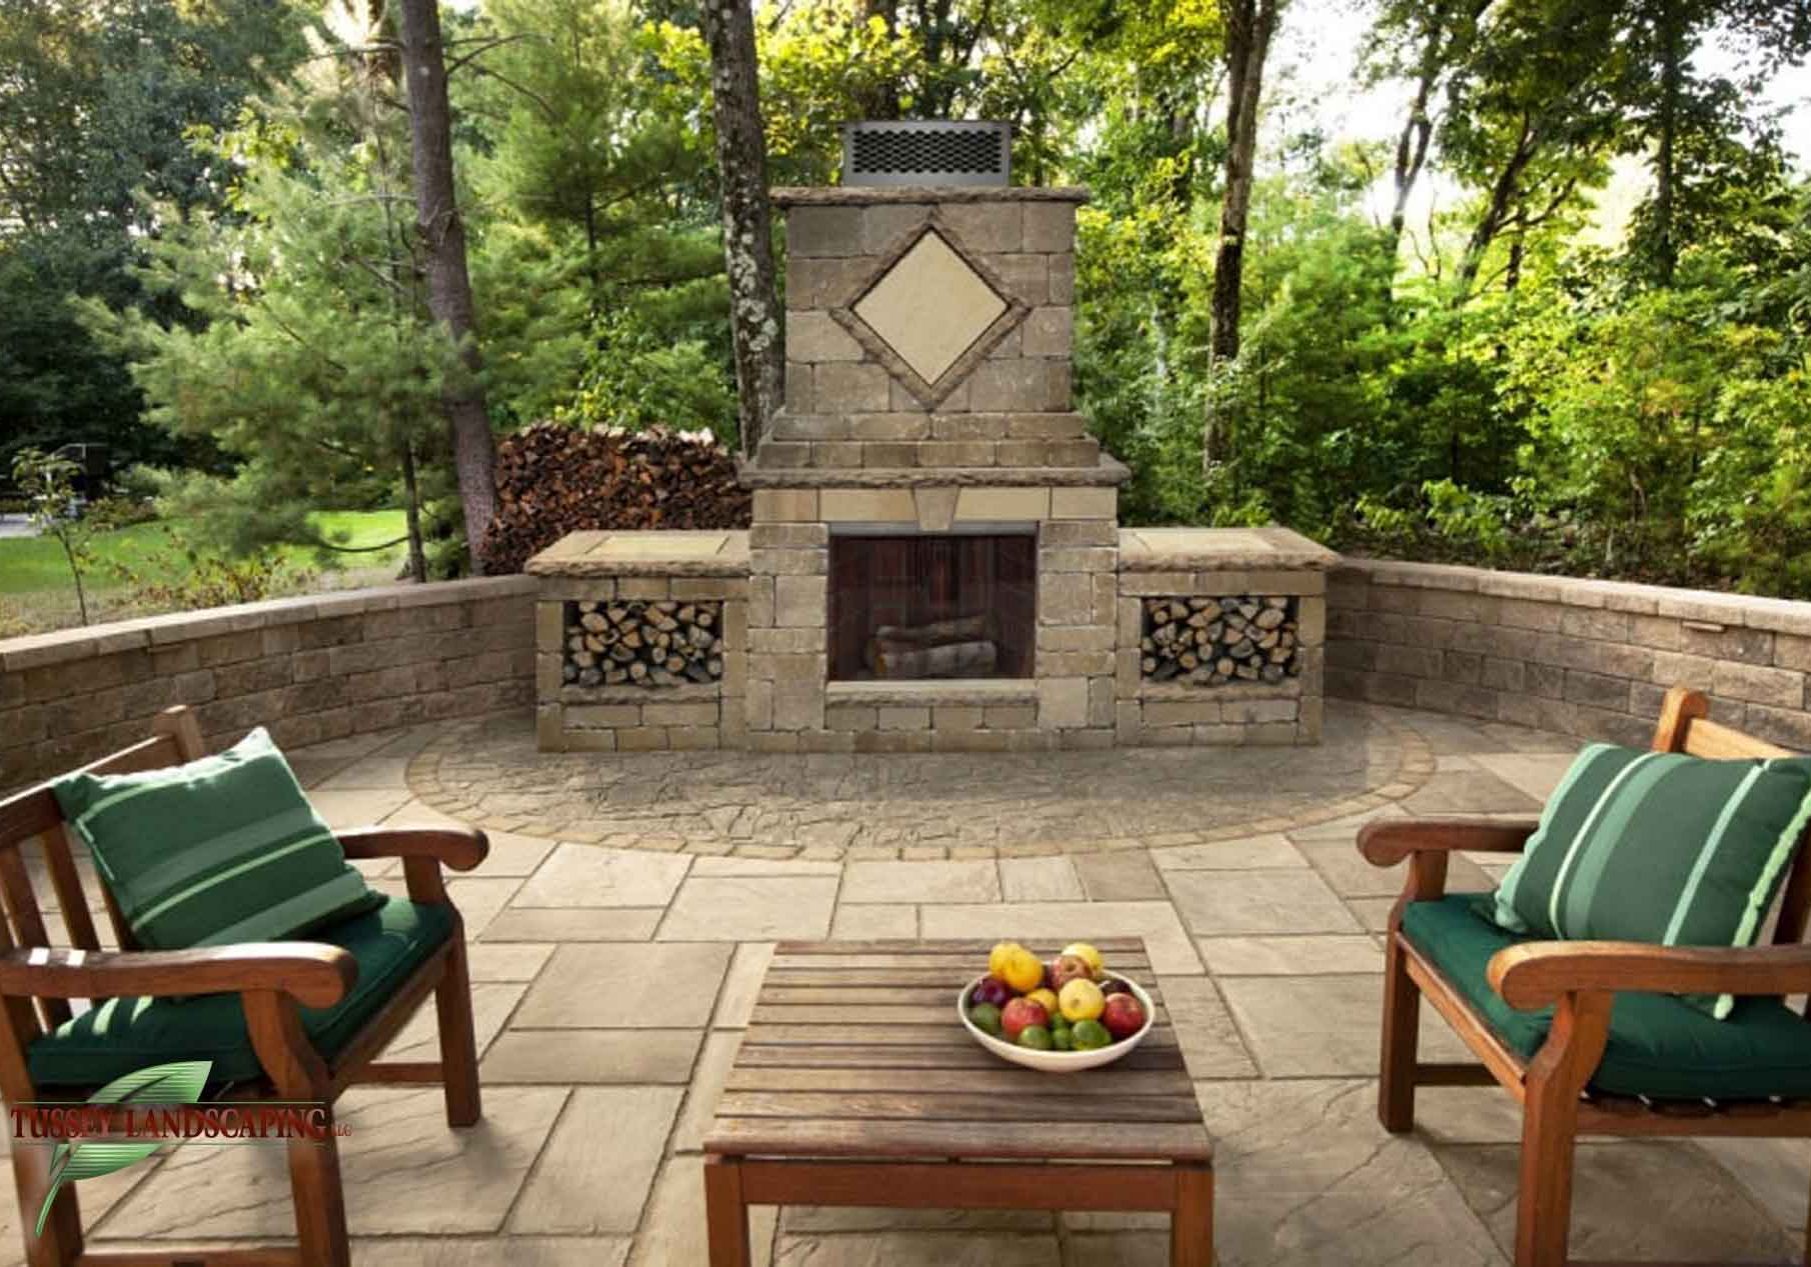 A patio with a fireplace and chairs.